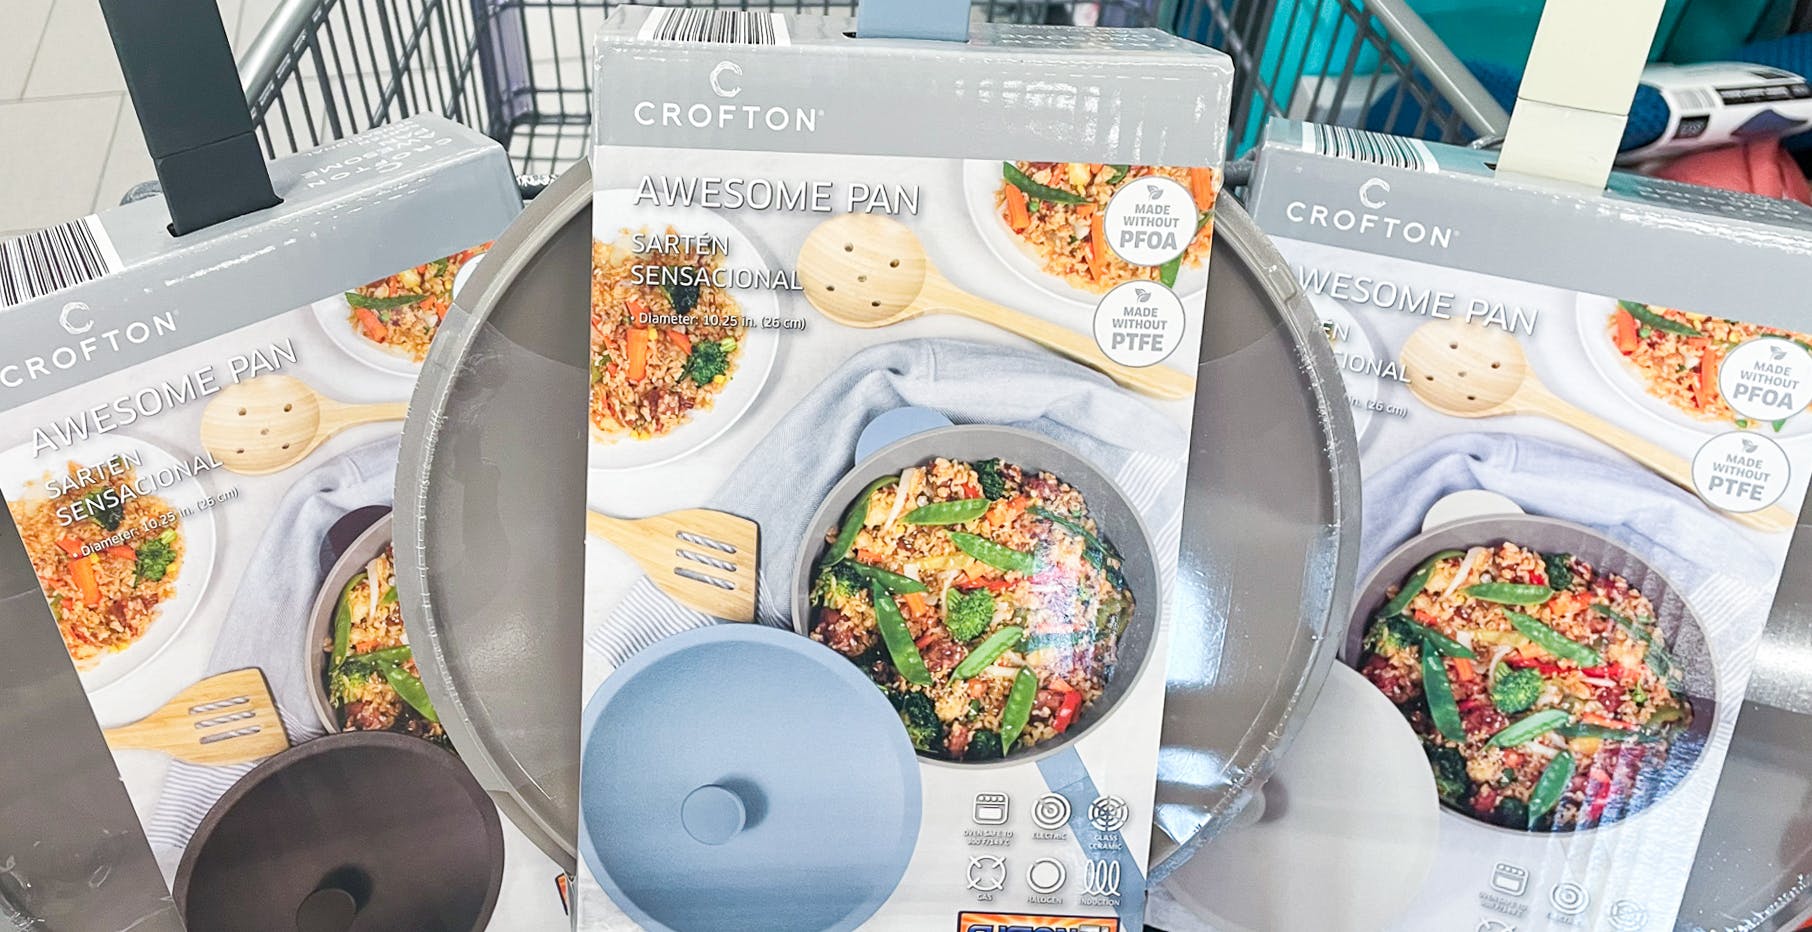 Aldi's New Awesome Pan Might Be the Always Pan Dupe You've Hoped For